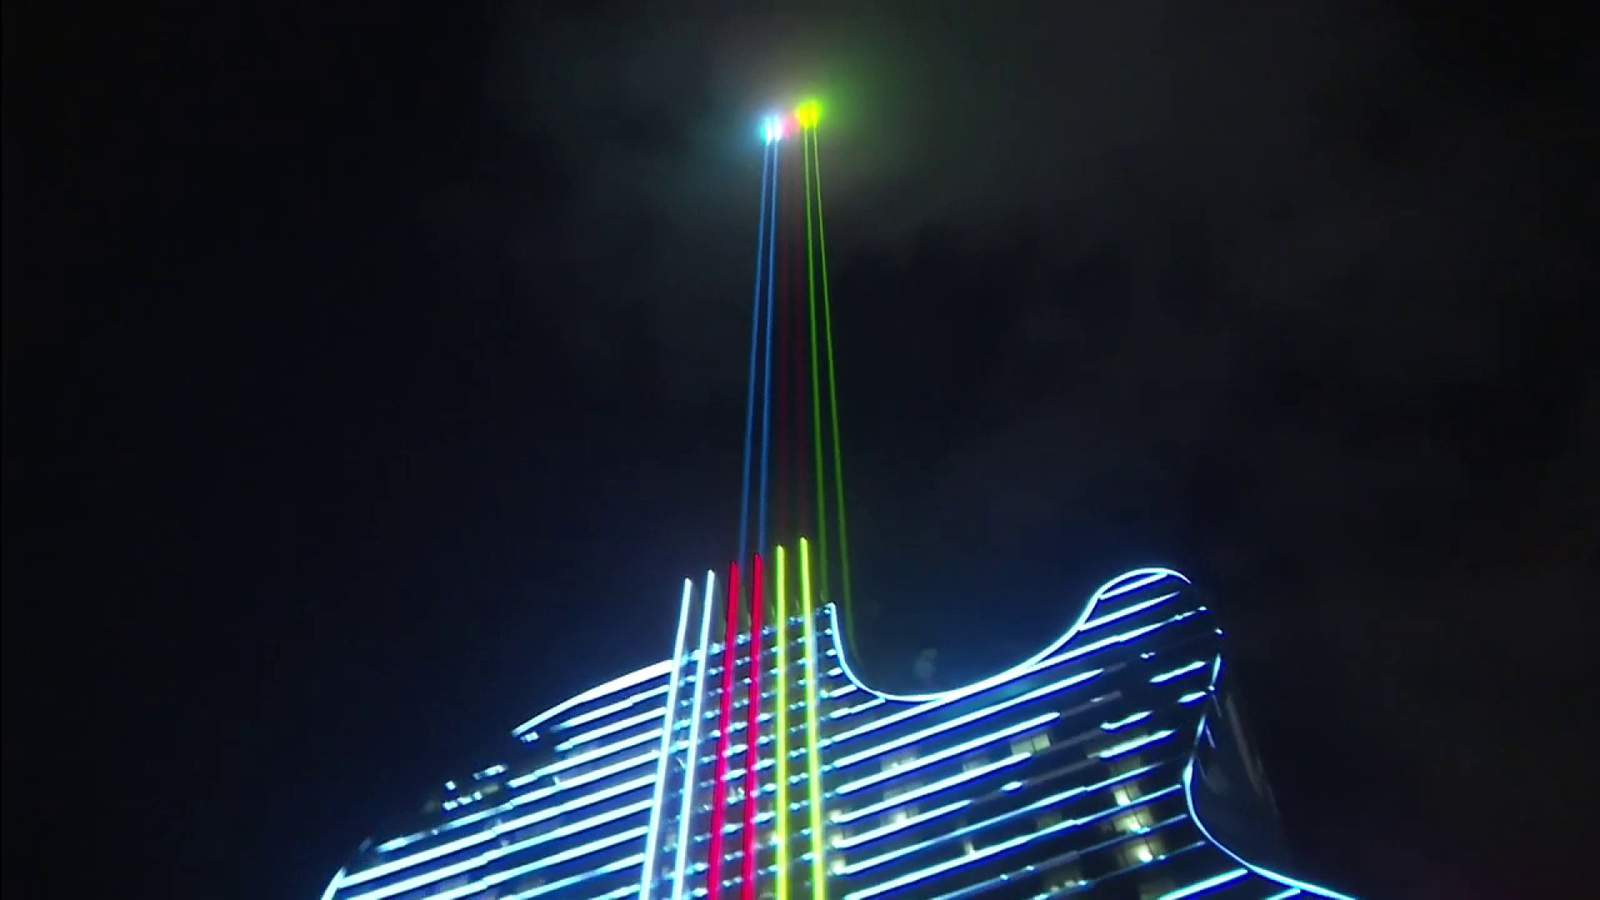 NYE in Broward includes Guitar’s light show, Fort Lauderdale’s virtual party